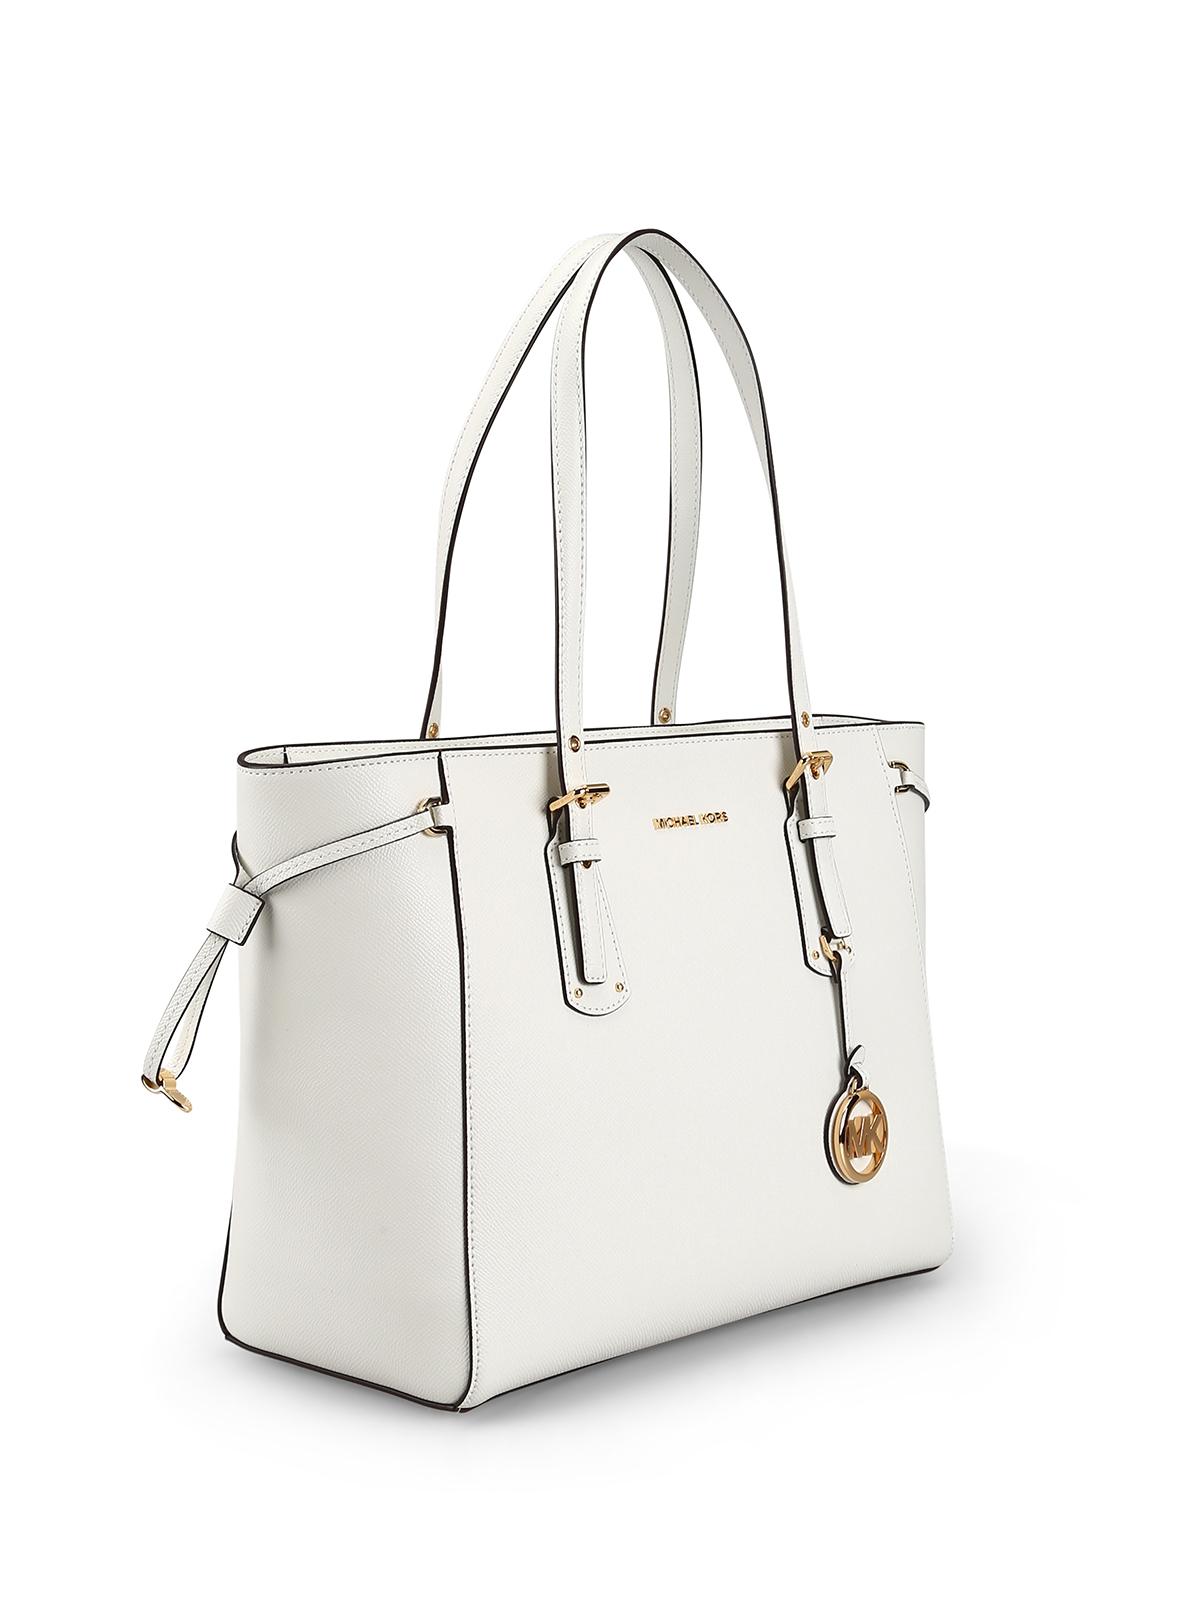 Totes bags Michael Kors - Voyager white leather medium tote - 30H7GV6T8L085